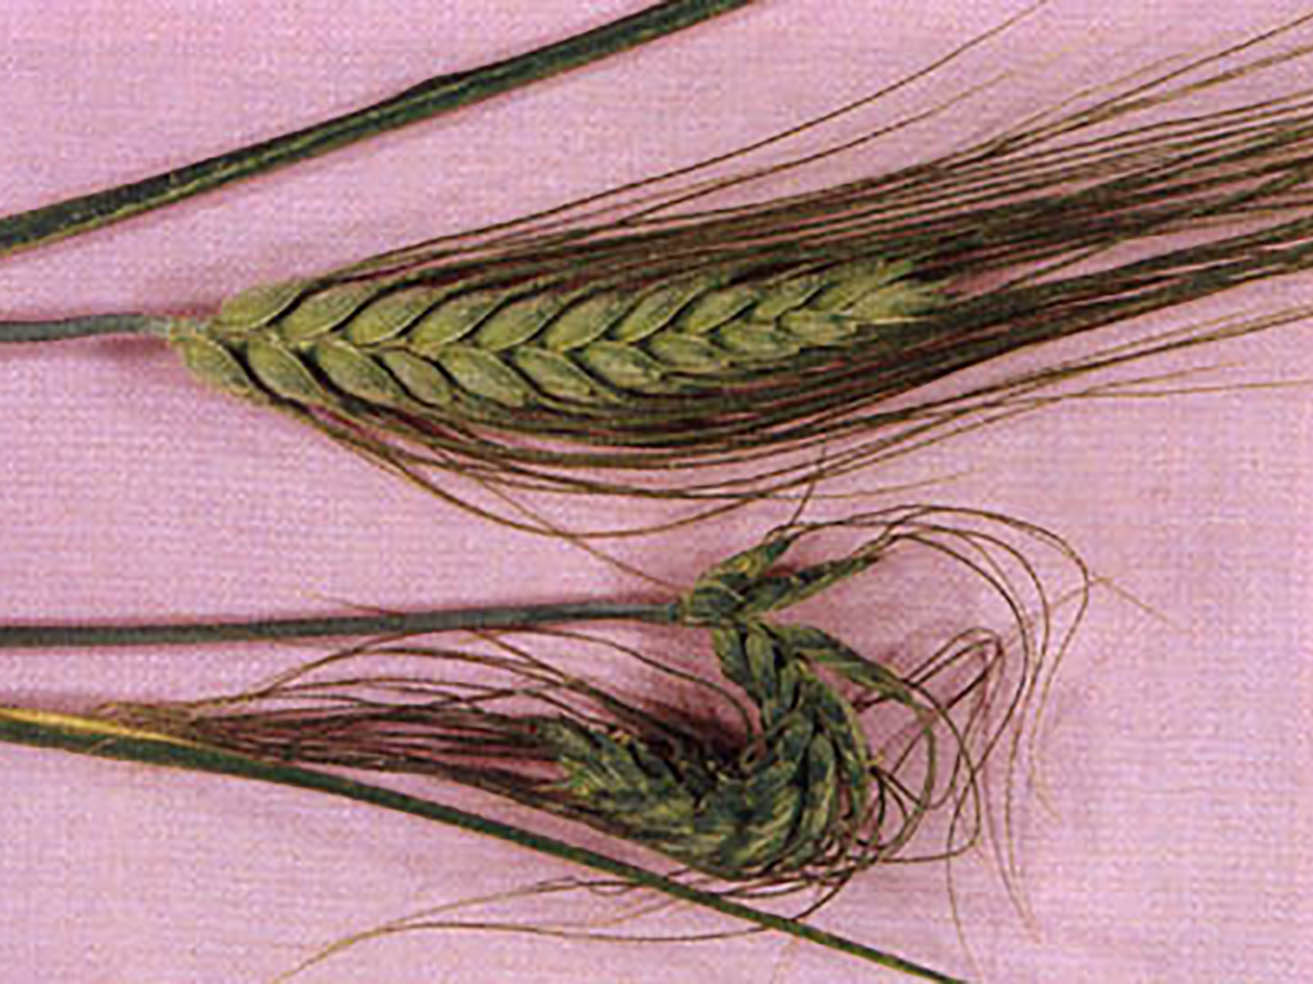 Fig. 5. Normal wheat head (left) compared to “fish hook” deformation caused by Russian wheat aphid feeding (right).